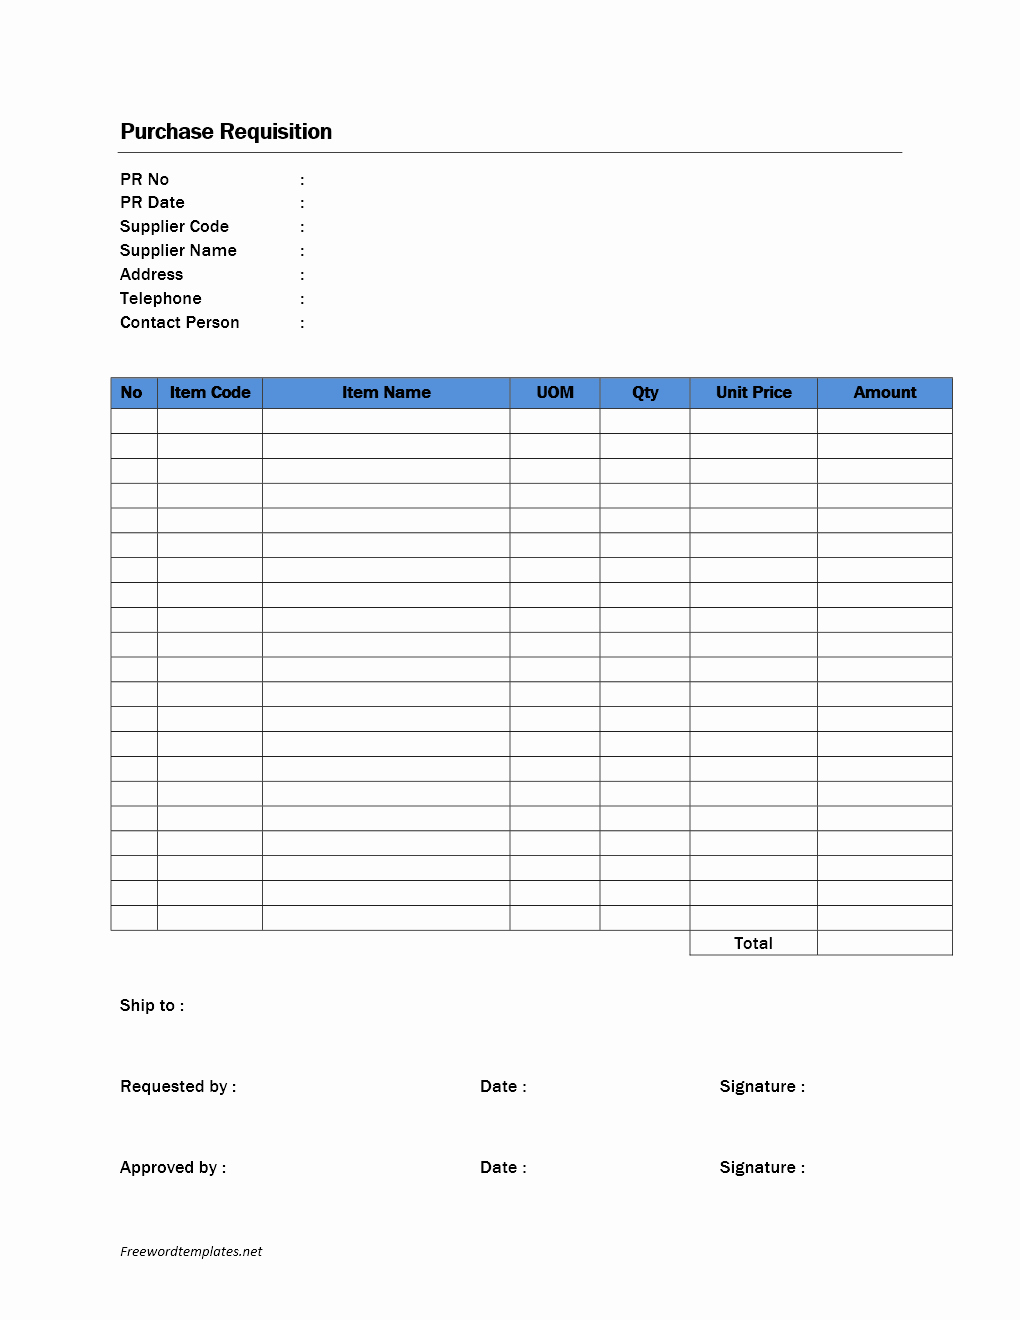 Purchase order Template Word Elegant Purchase Requisition form